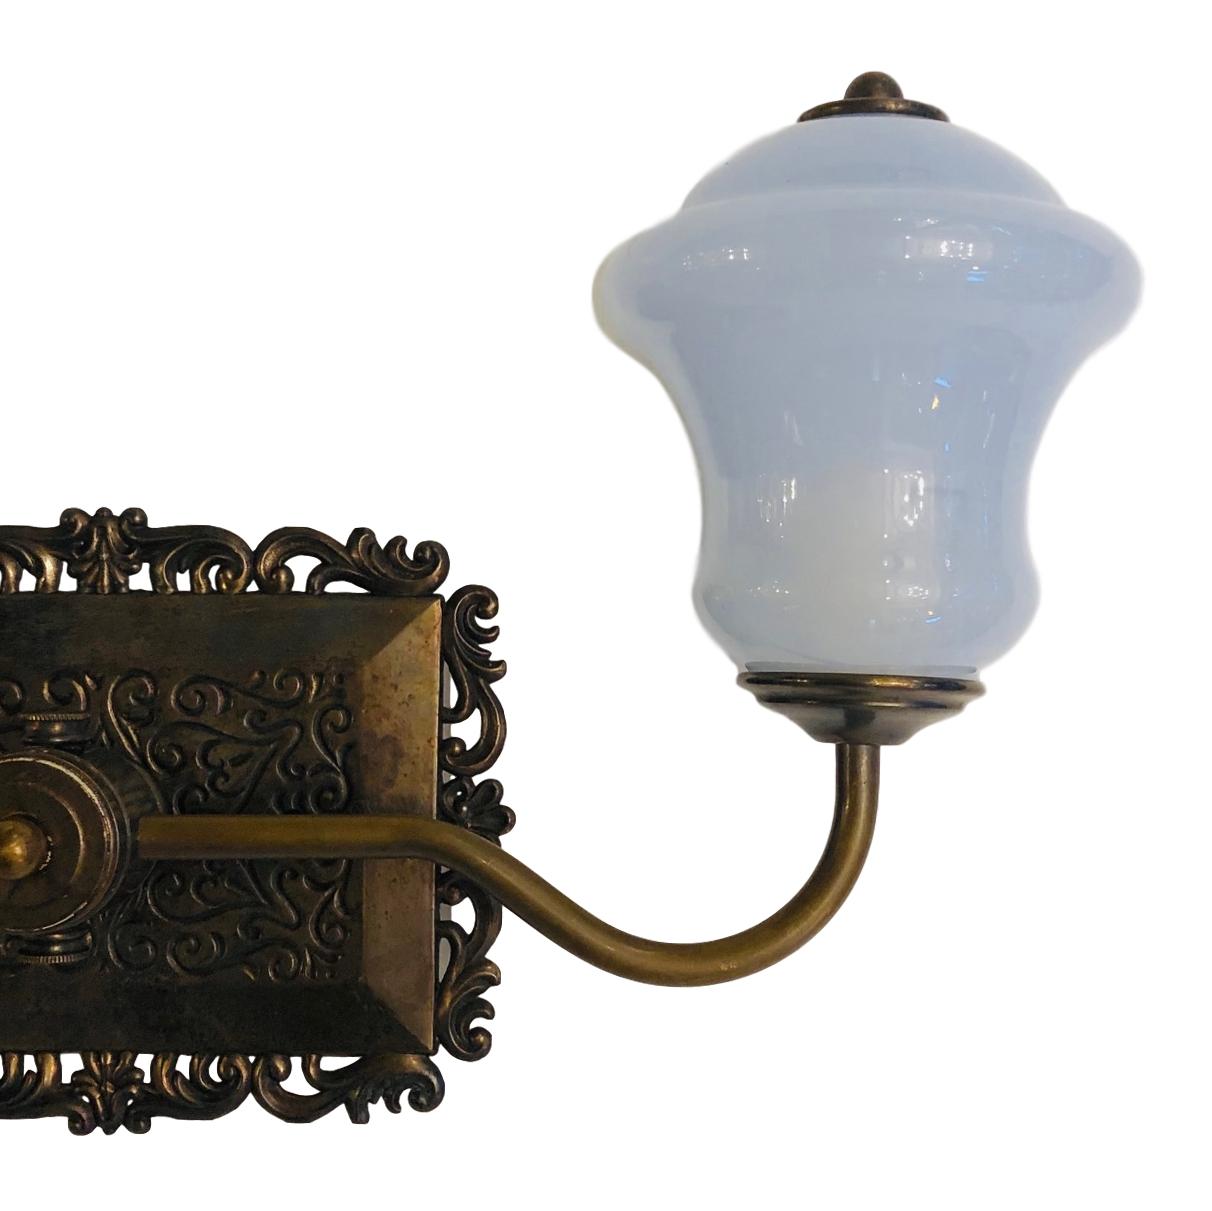 A pair of circa 1930s Italian two-arm bronze sconces with open-work borders and opaline glass shades.

Measurements:
Height 9